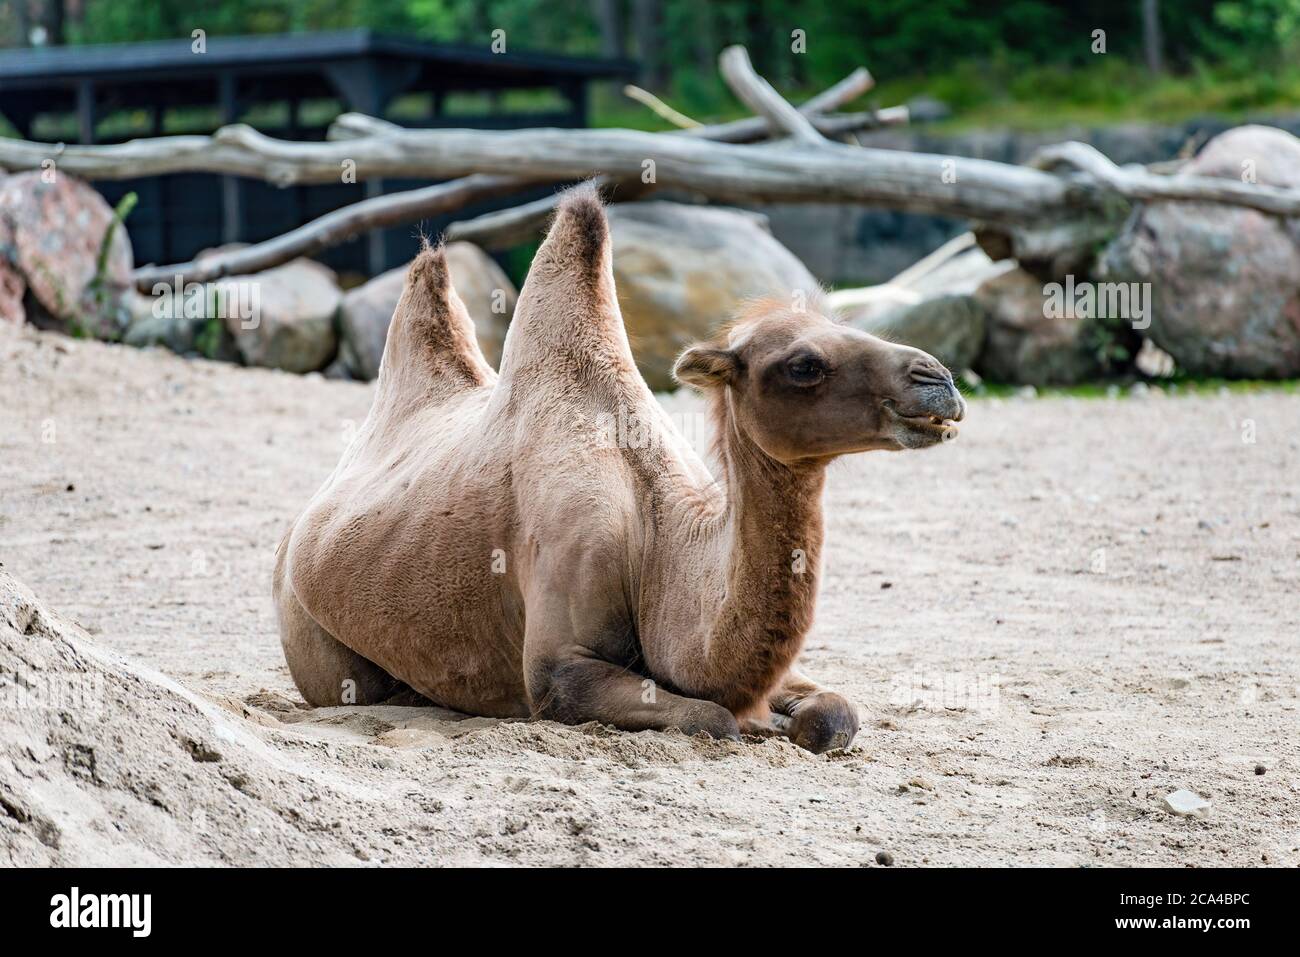 A camel is an even-toed ungulate in the genus Camelus that bears distinctive fatty deposits known as 'humps' on its back. Stock Photo